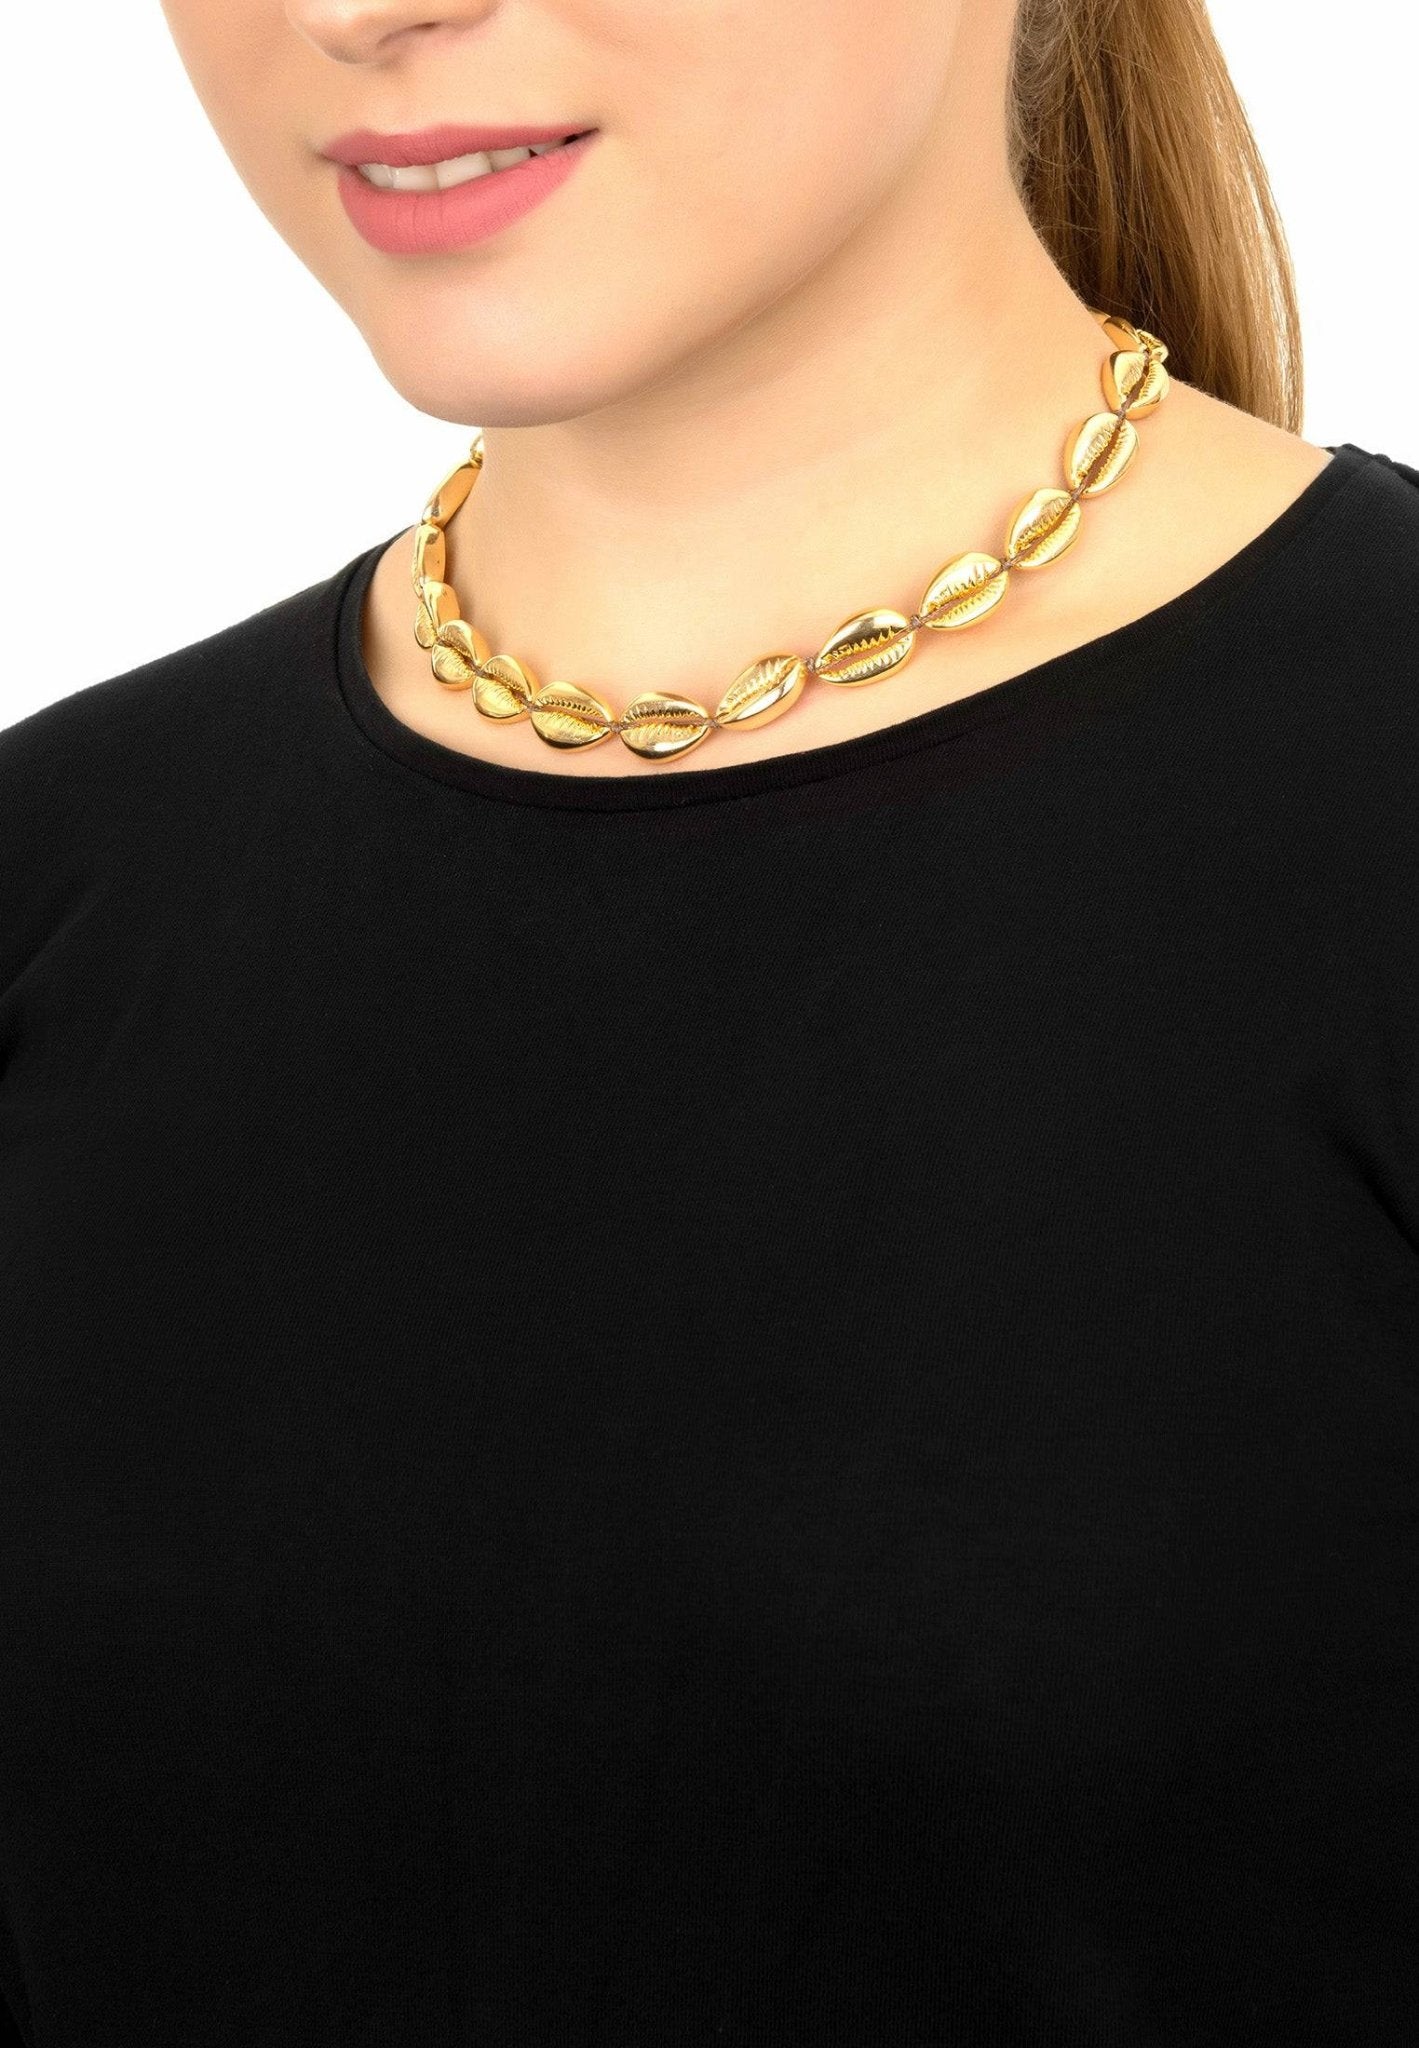 Cowrie Shell Choker Strand Necklace Gold - LATELITA Necklaces